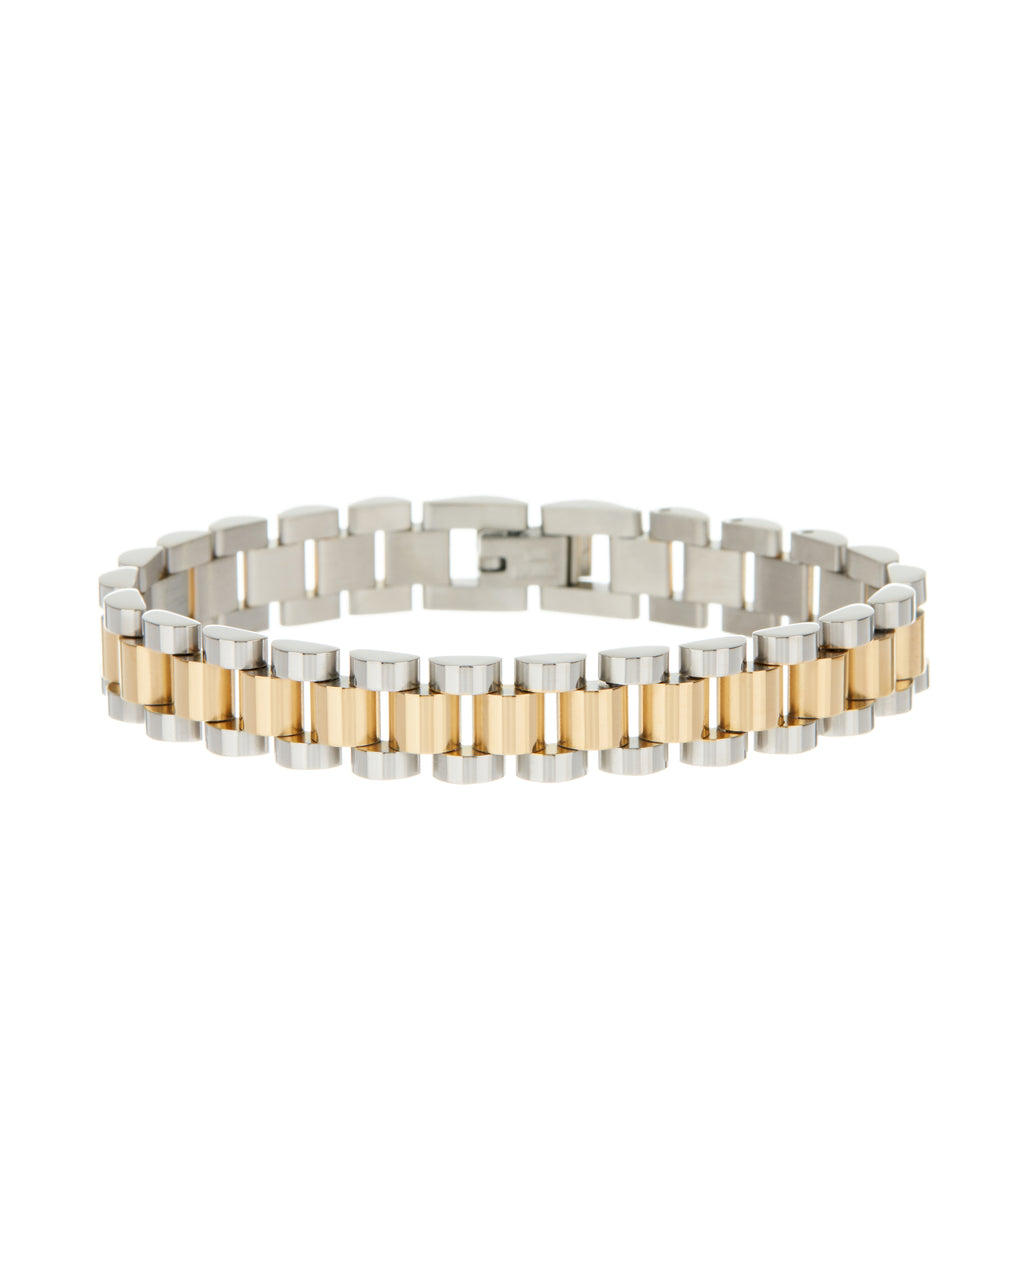 Timepiece Bracelet in Silver and Gold